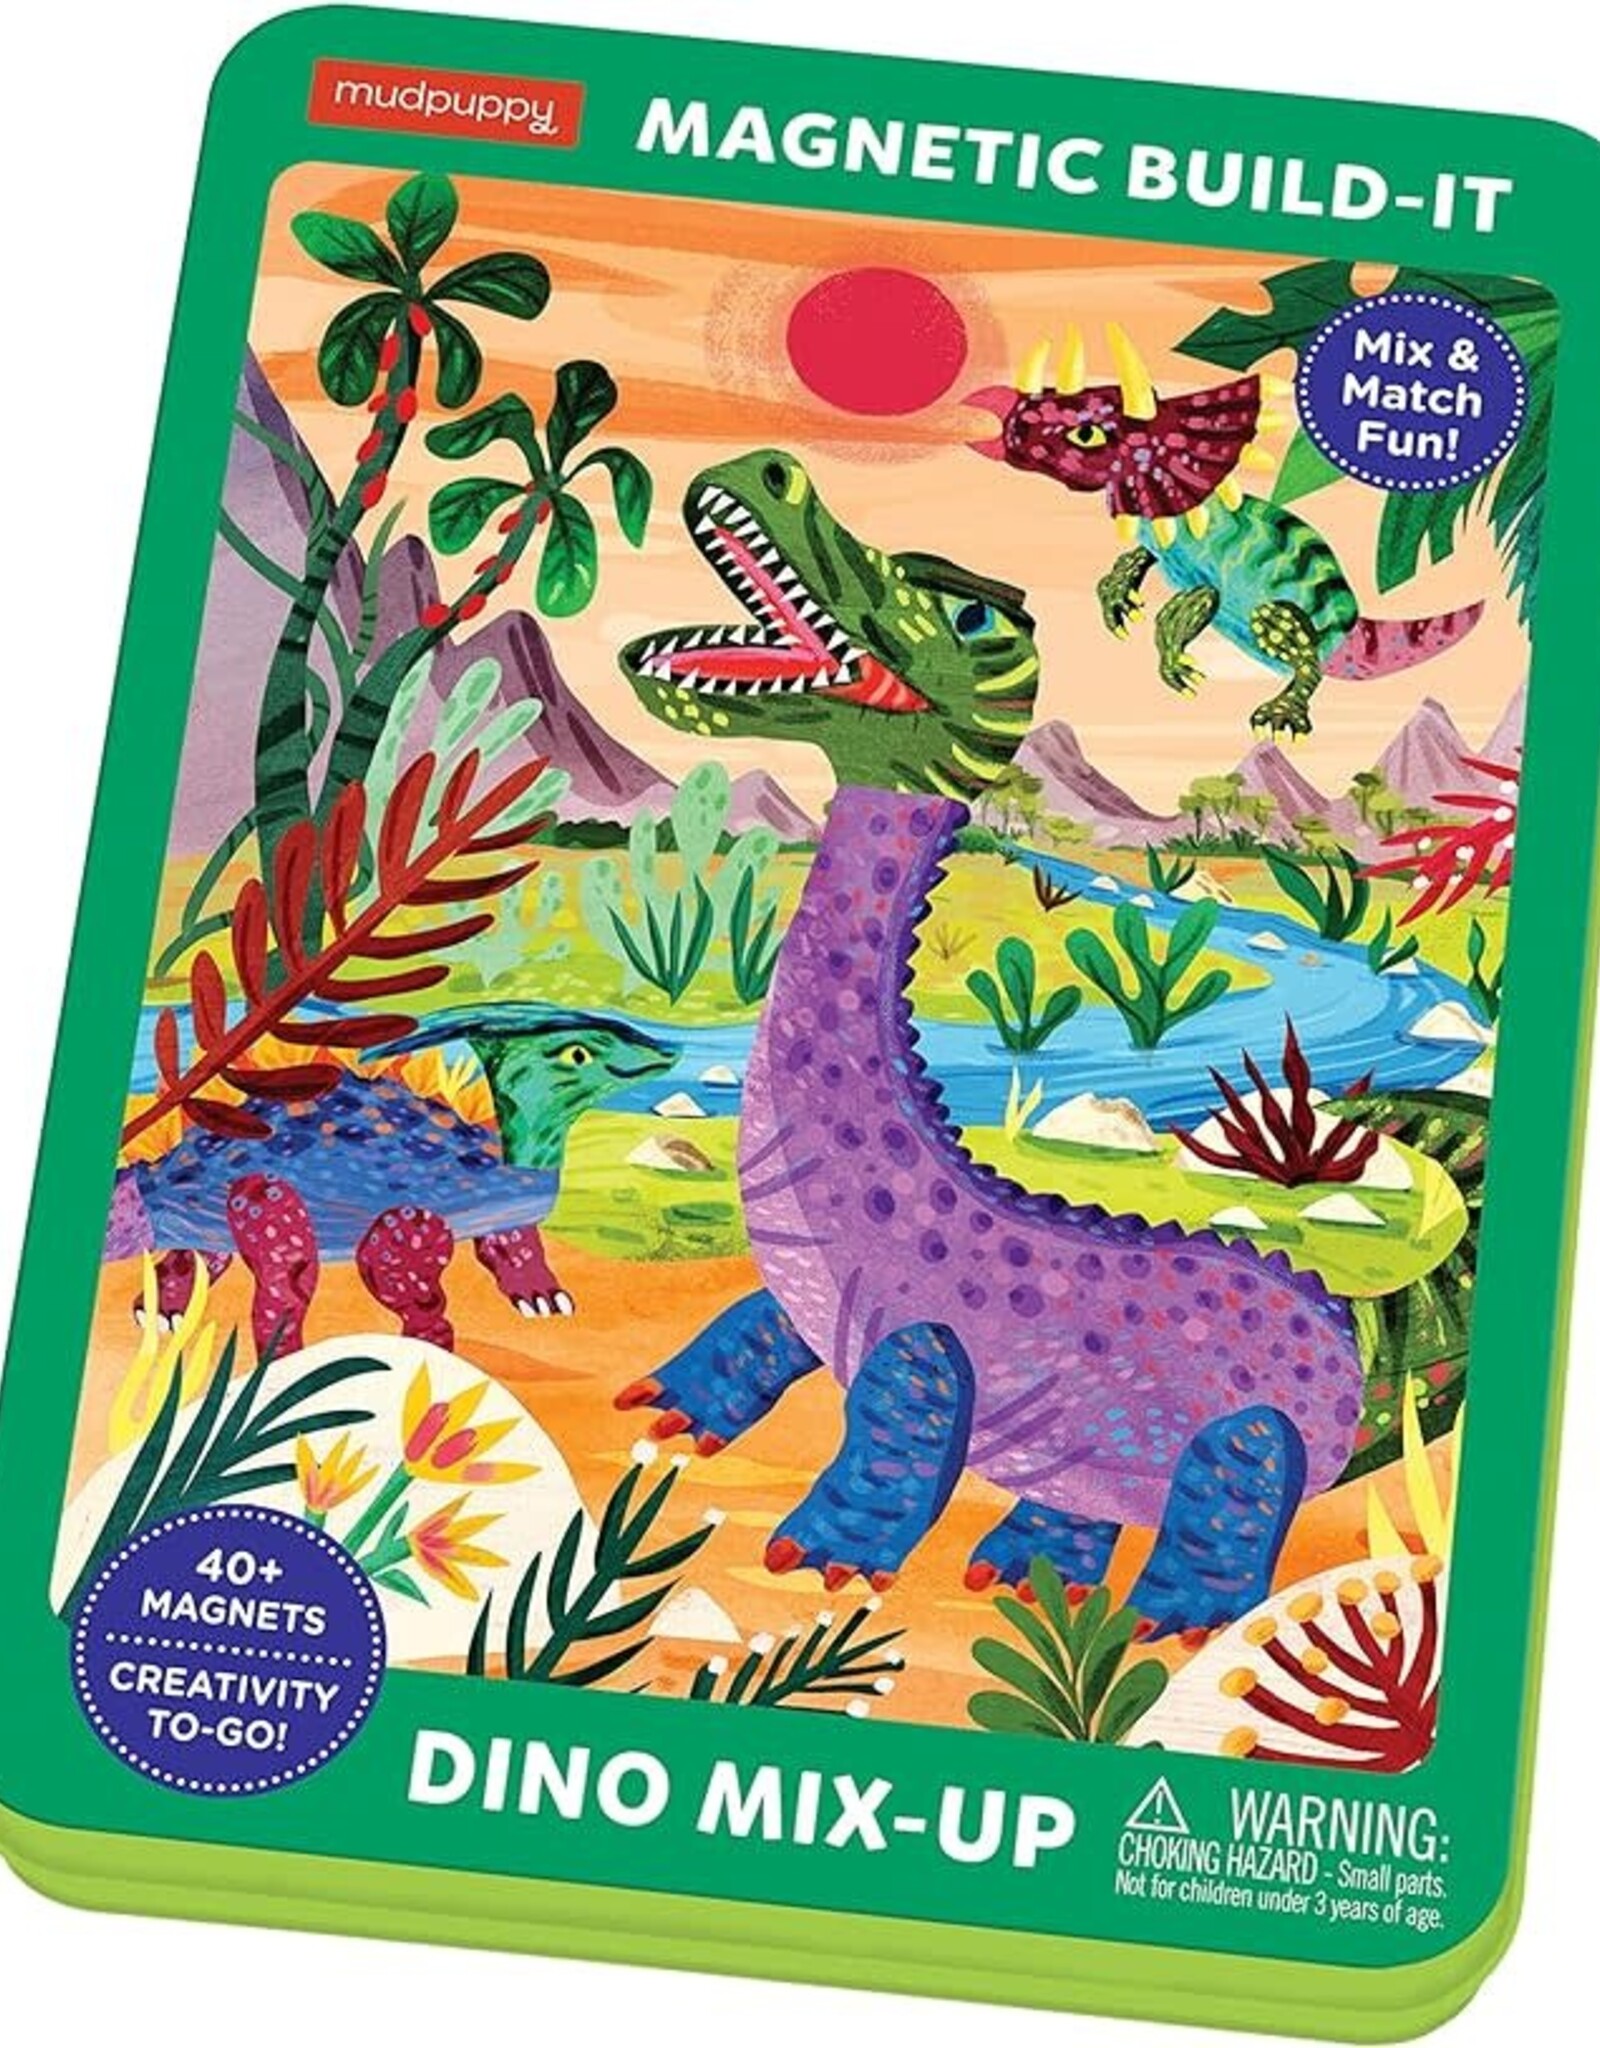 Chronicle Magnetic Play Set - Dino Mix Up